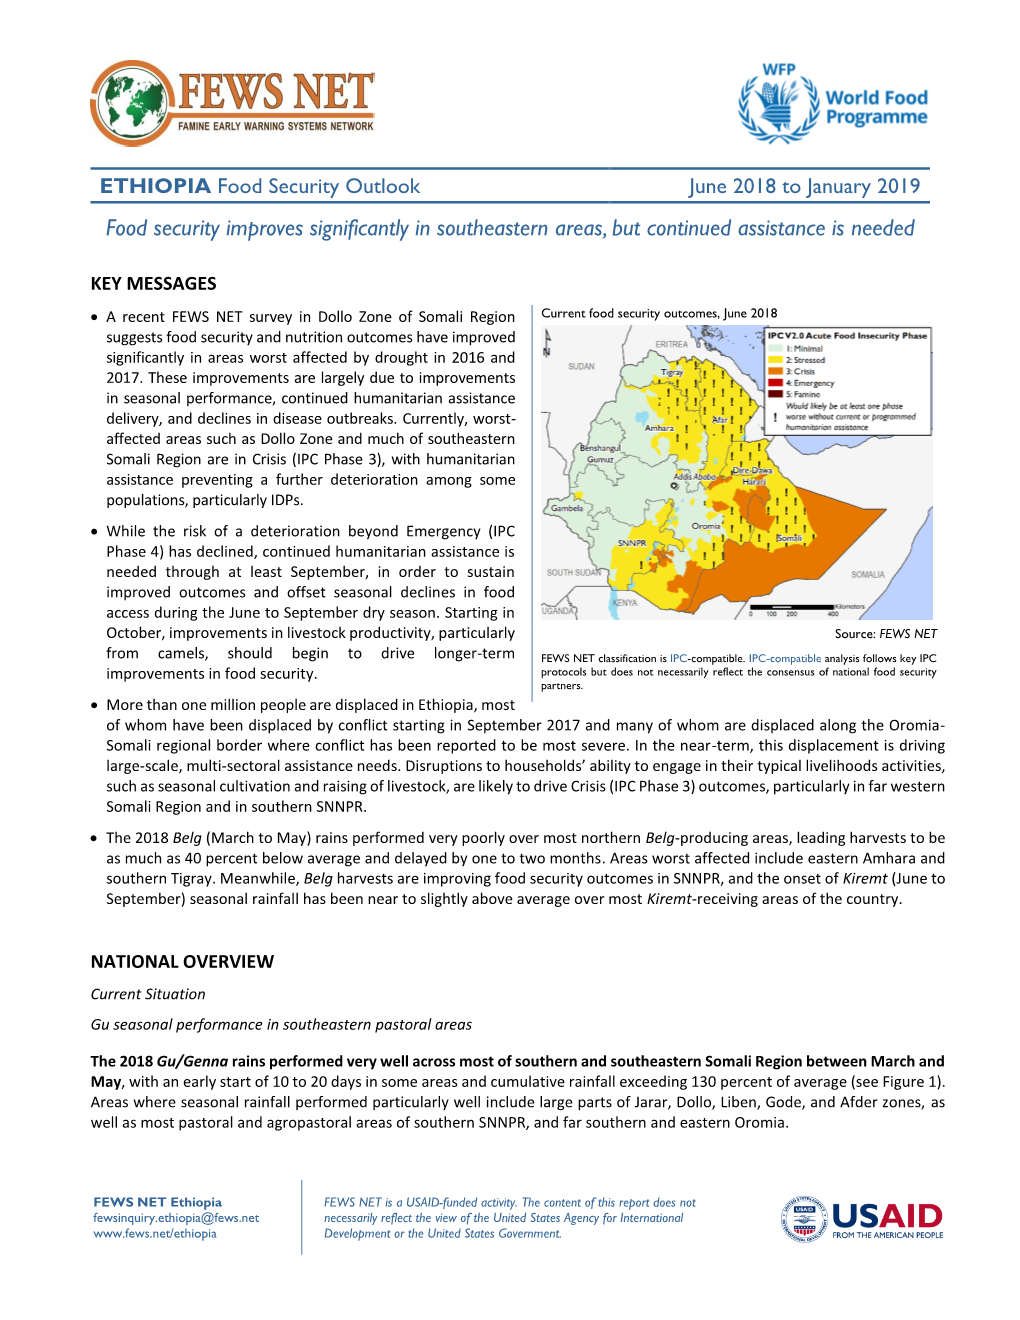 June 2018 to January 2019 Food Security Improves Significantly in Southeastern Areas, but Continued Assistance Is Needed